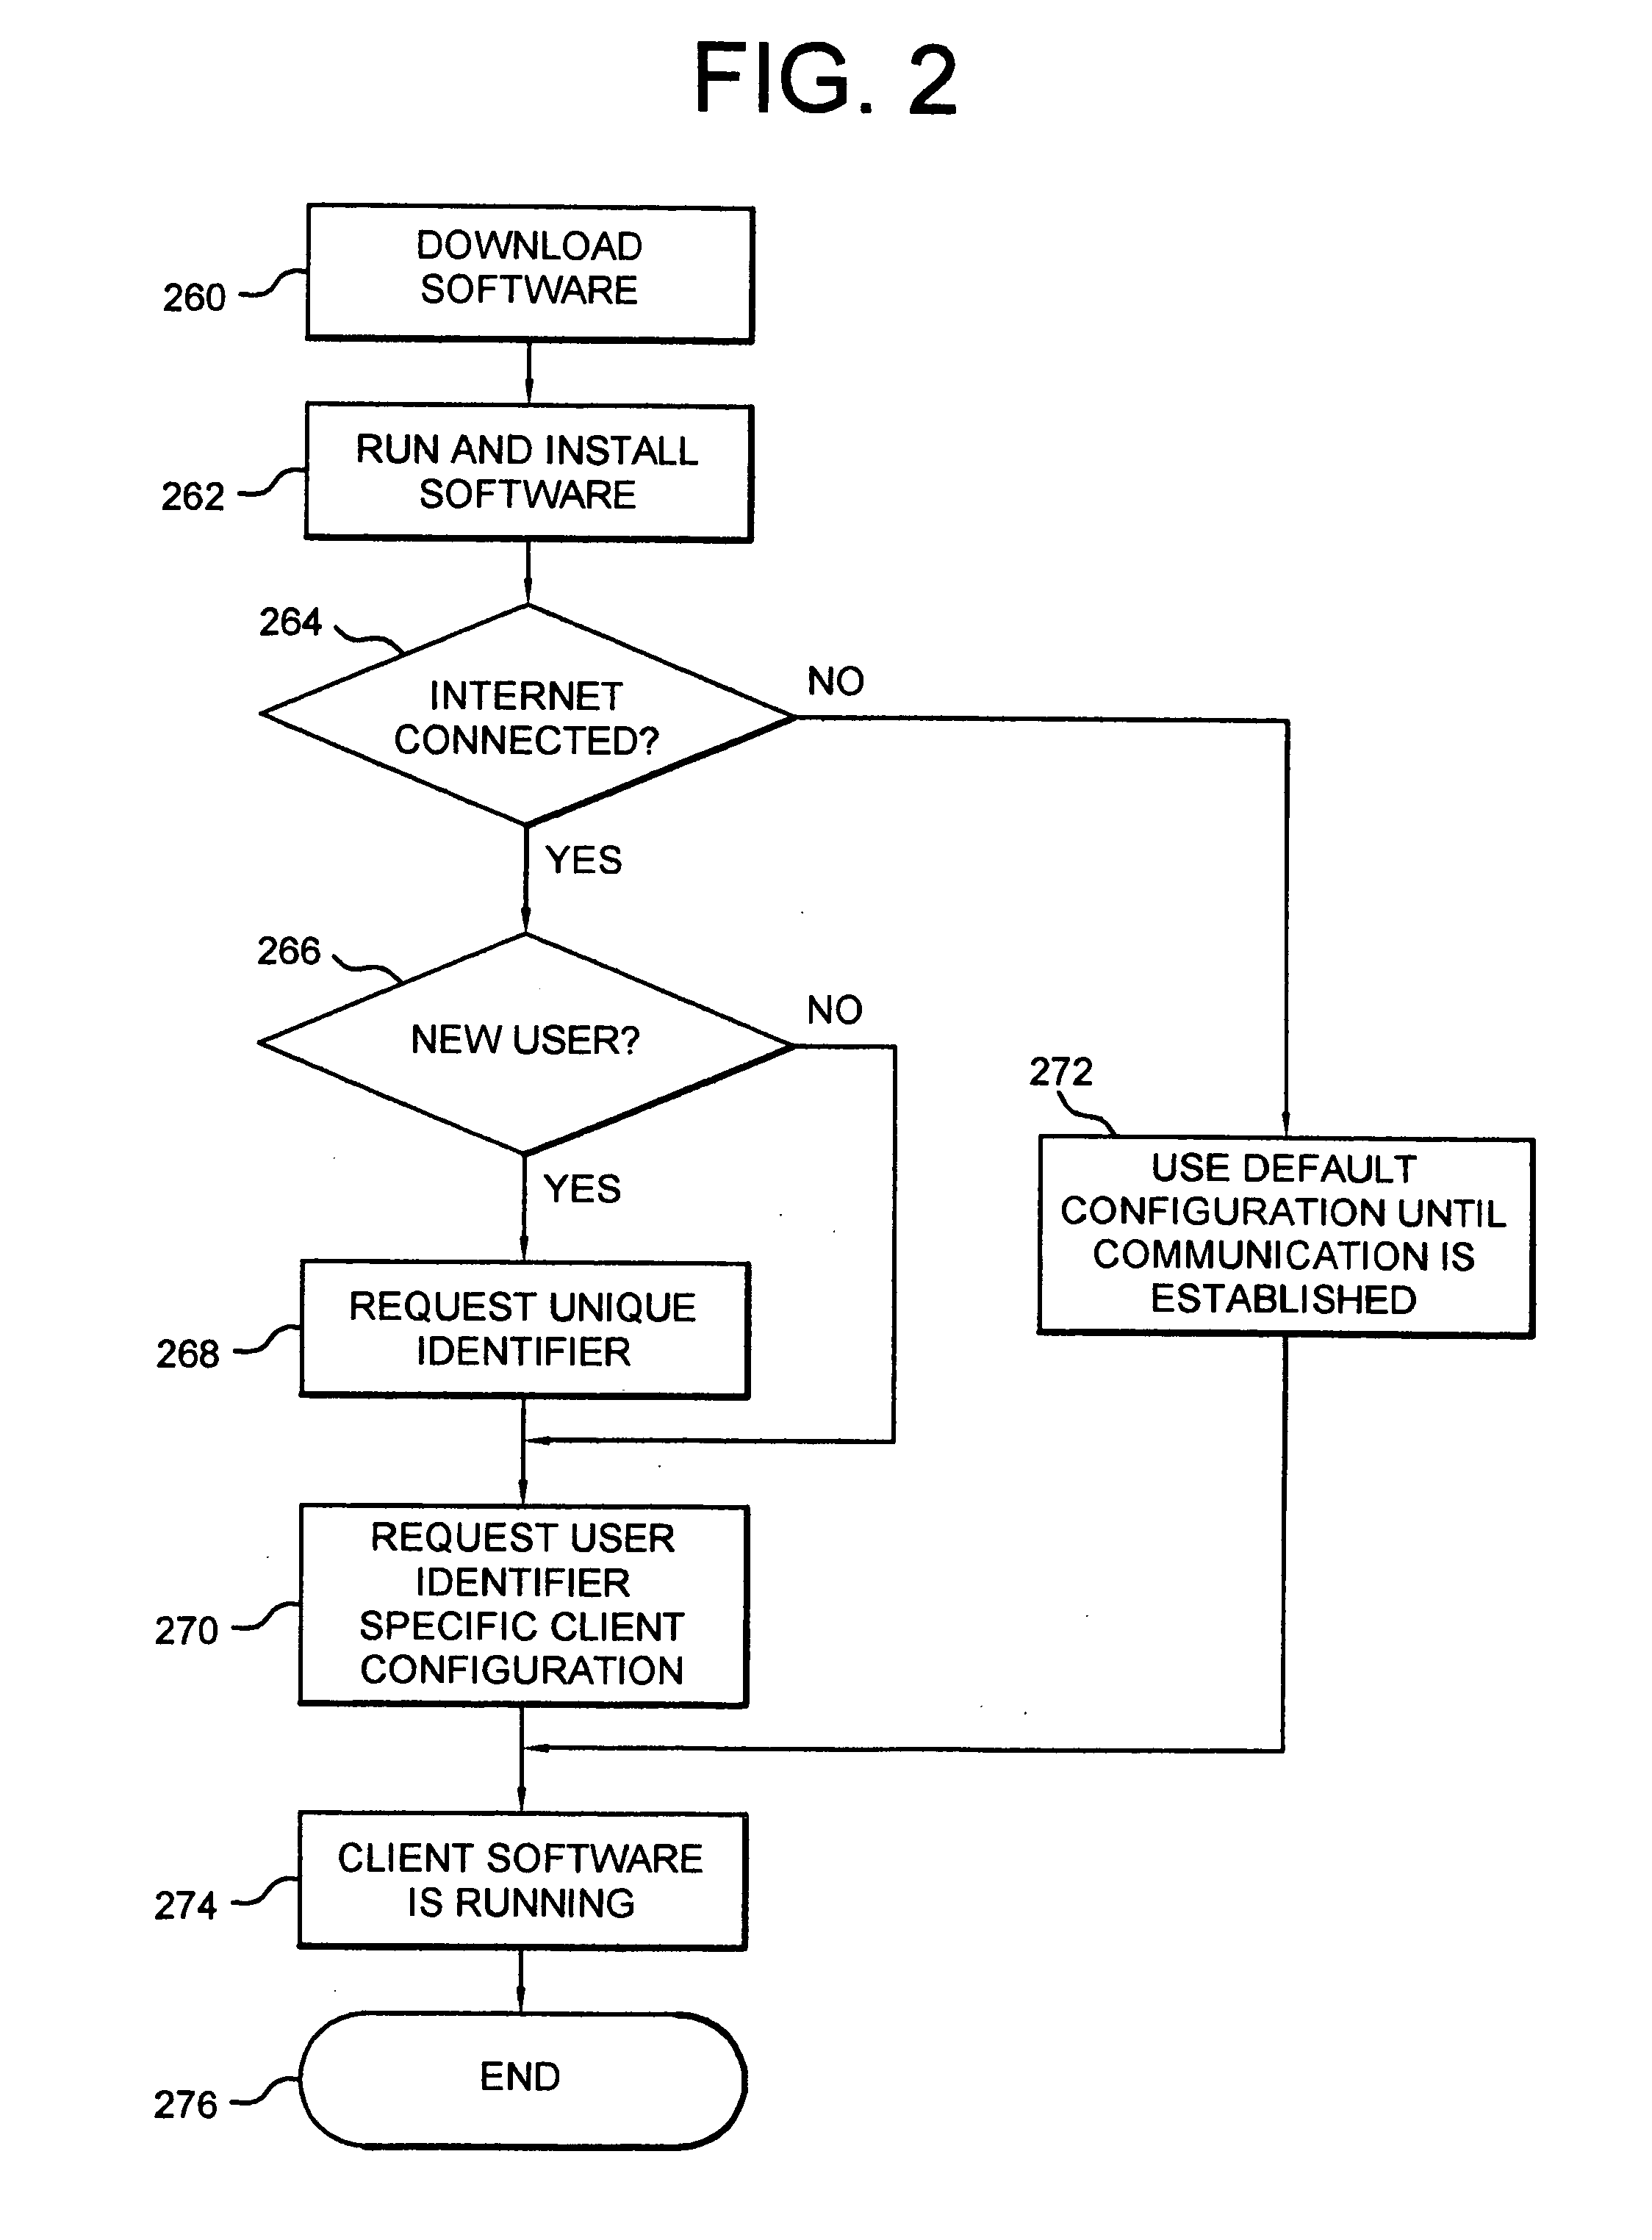 Method and apparatus for providing dynamic information to a user via a visual display